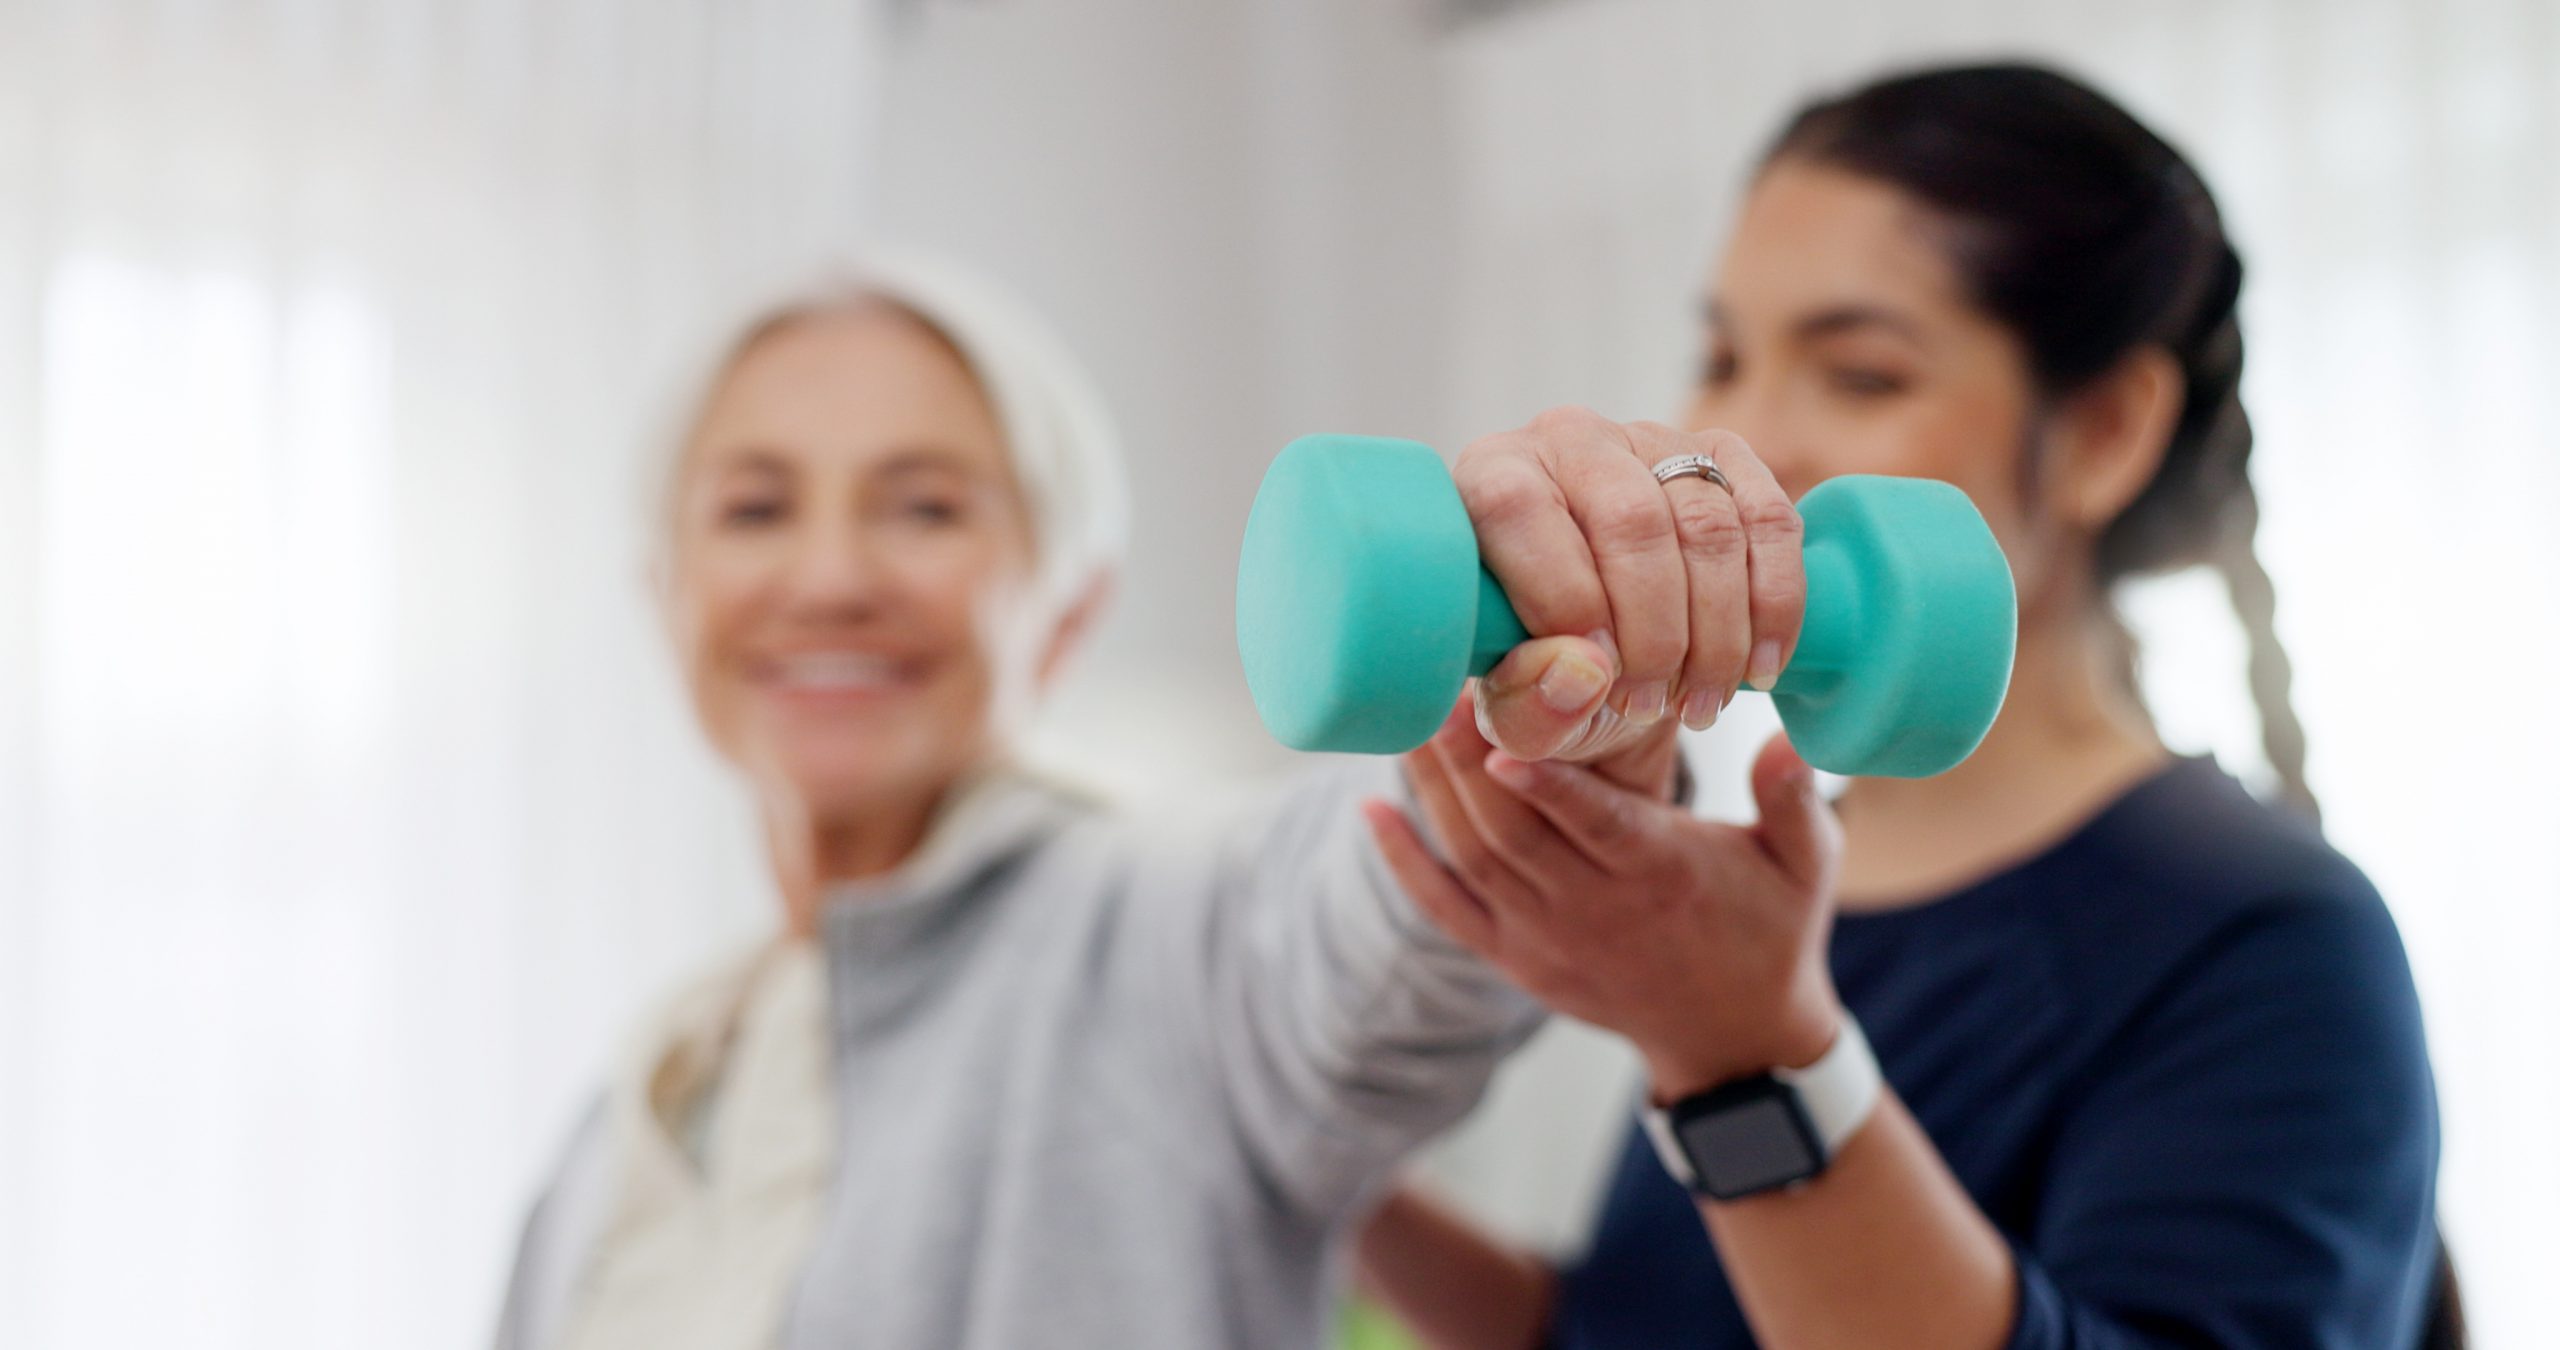 Woman,,Nurse,And,Dumbbell,In,Elderly,Care,For,Physiotherapy,,Exercise